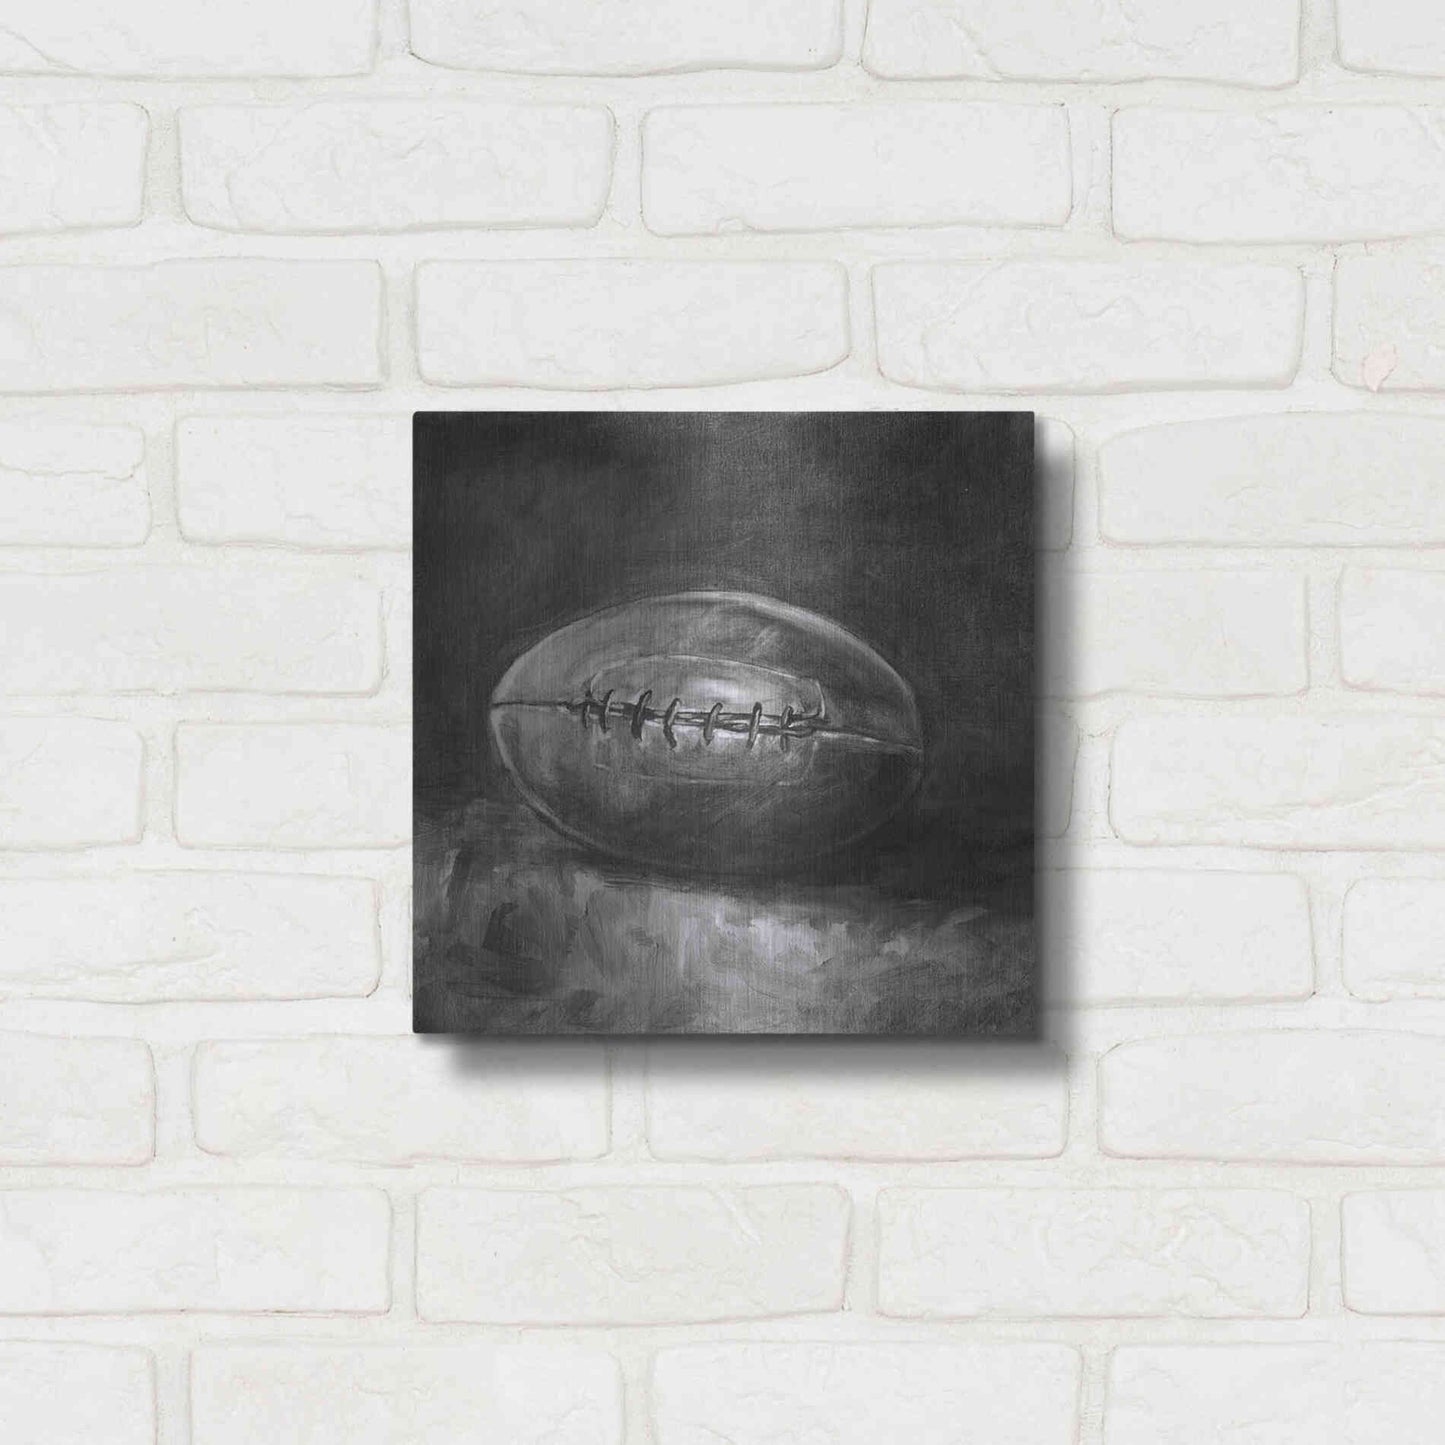 Luxe Metal Art 'Rustic Sports IV Black and White' by Ethan Harper, Metal Wall Art,12x12